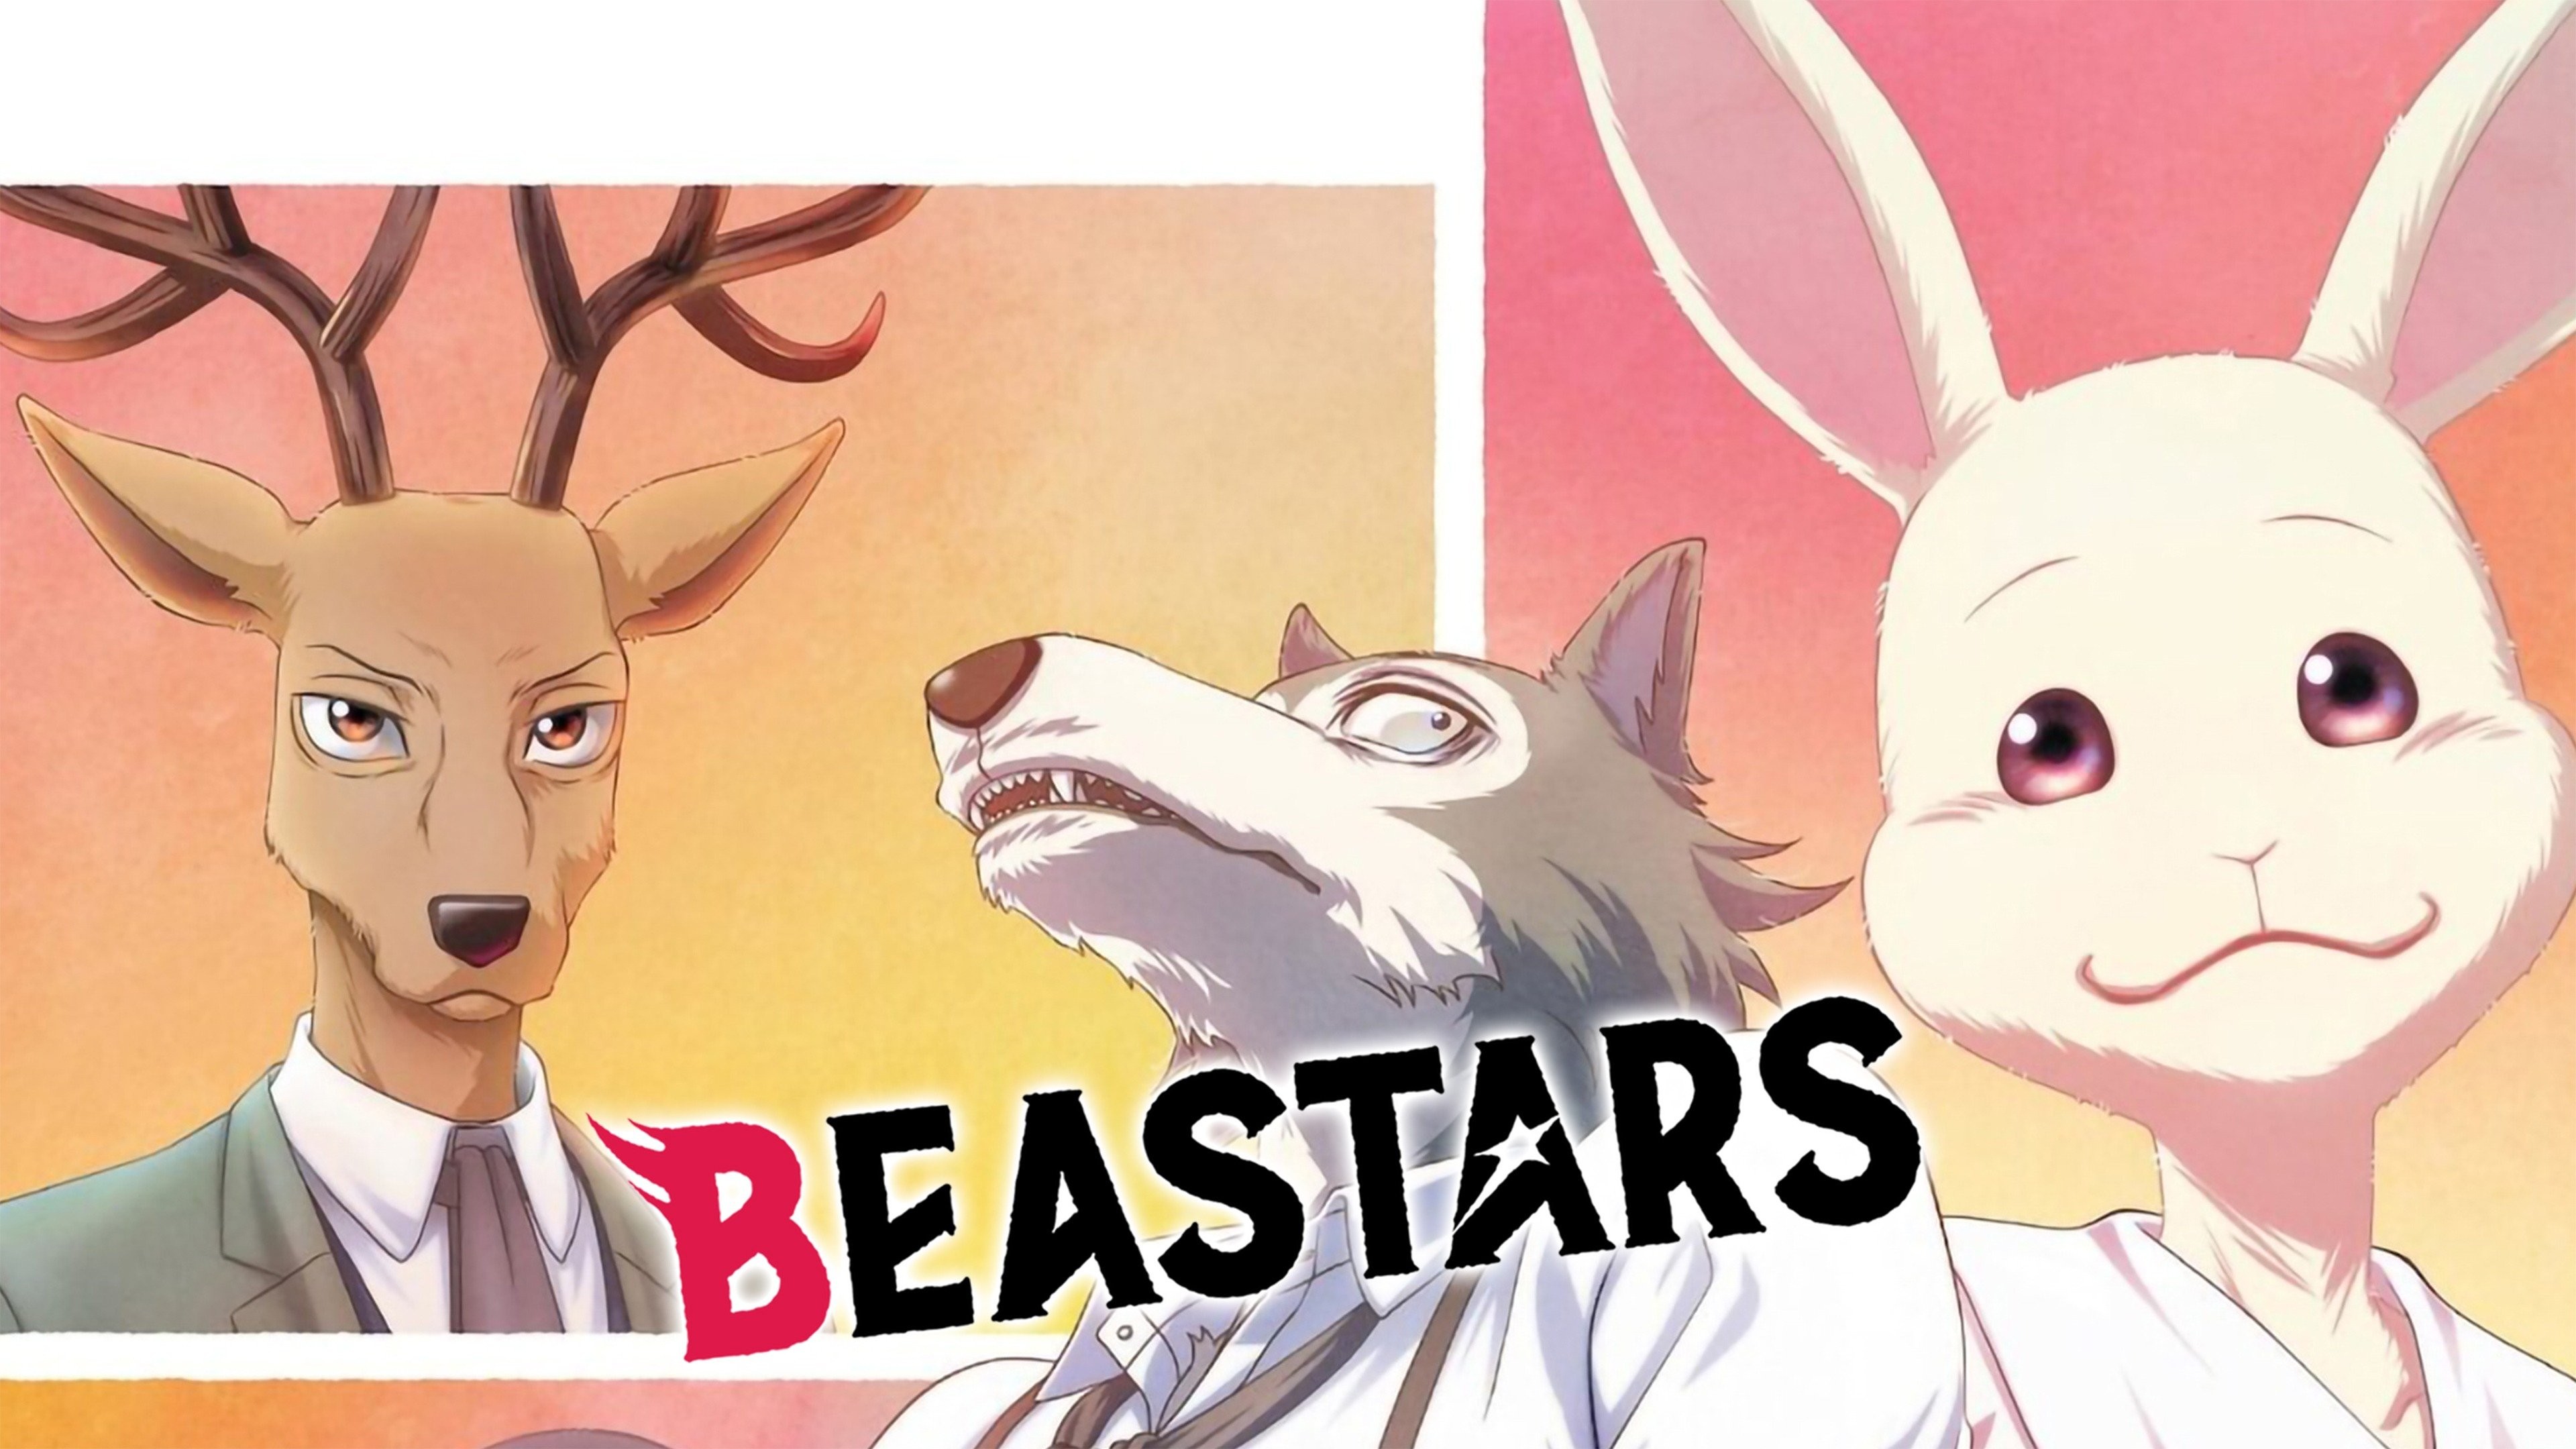 Beastars Season 2 Episode 6 Discussion & Gallery - Anime Shelter